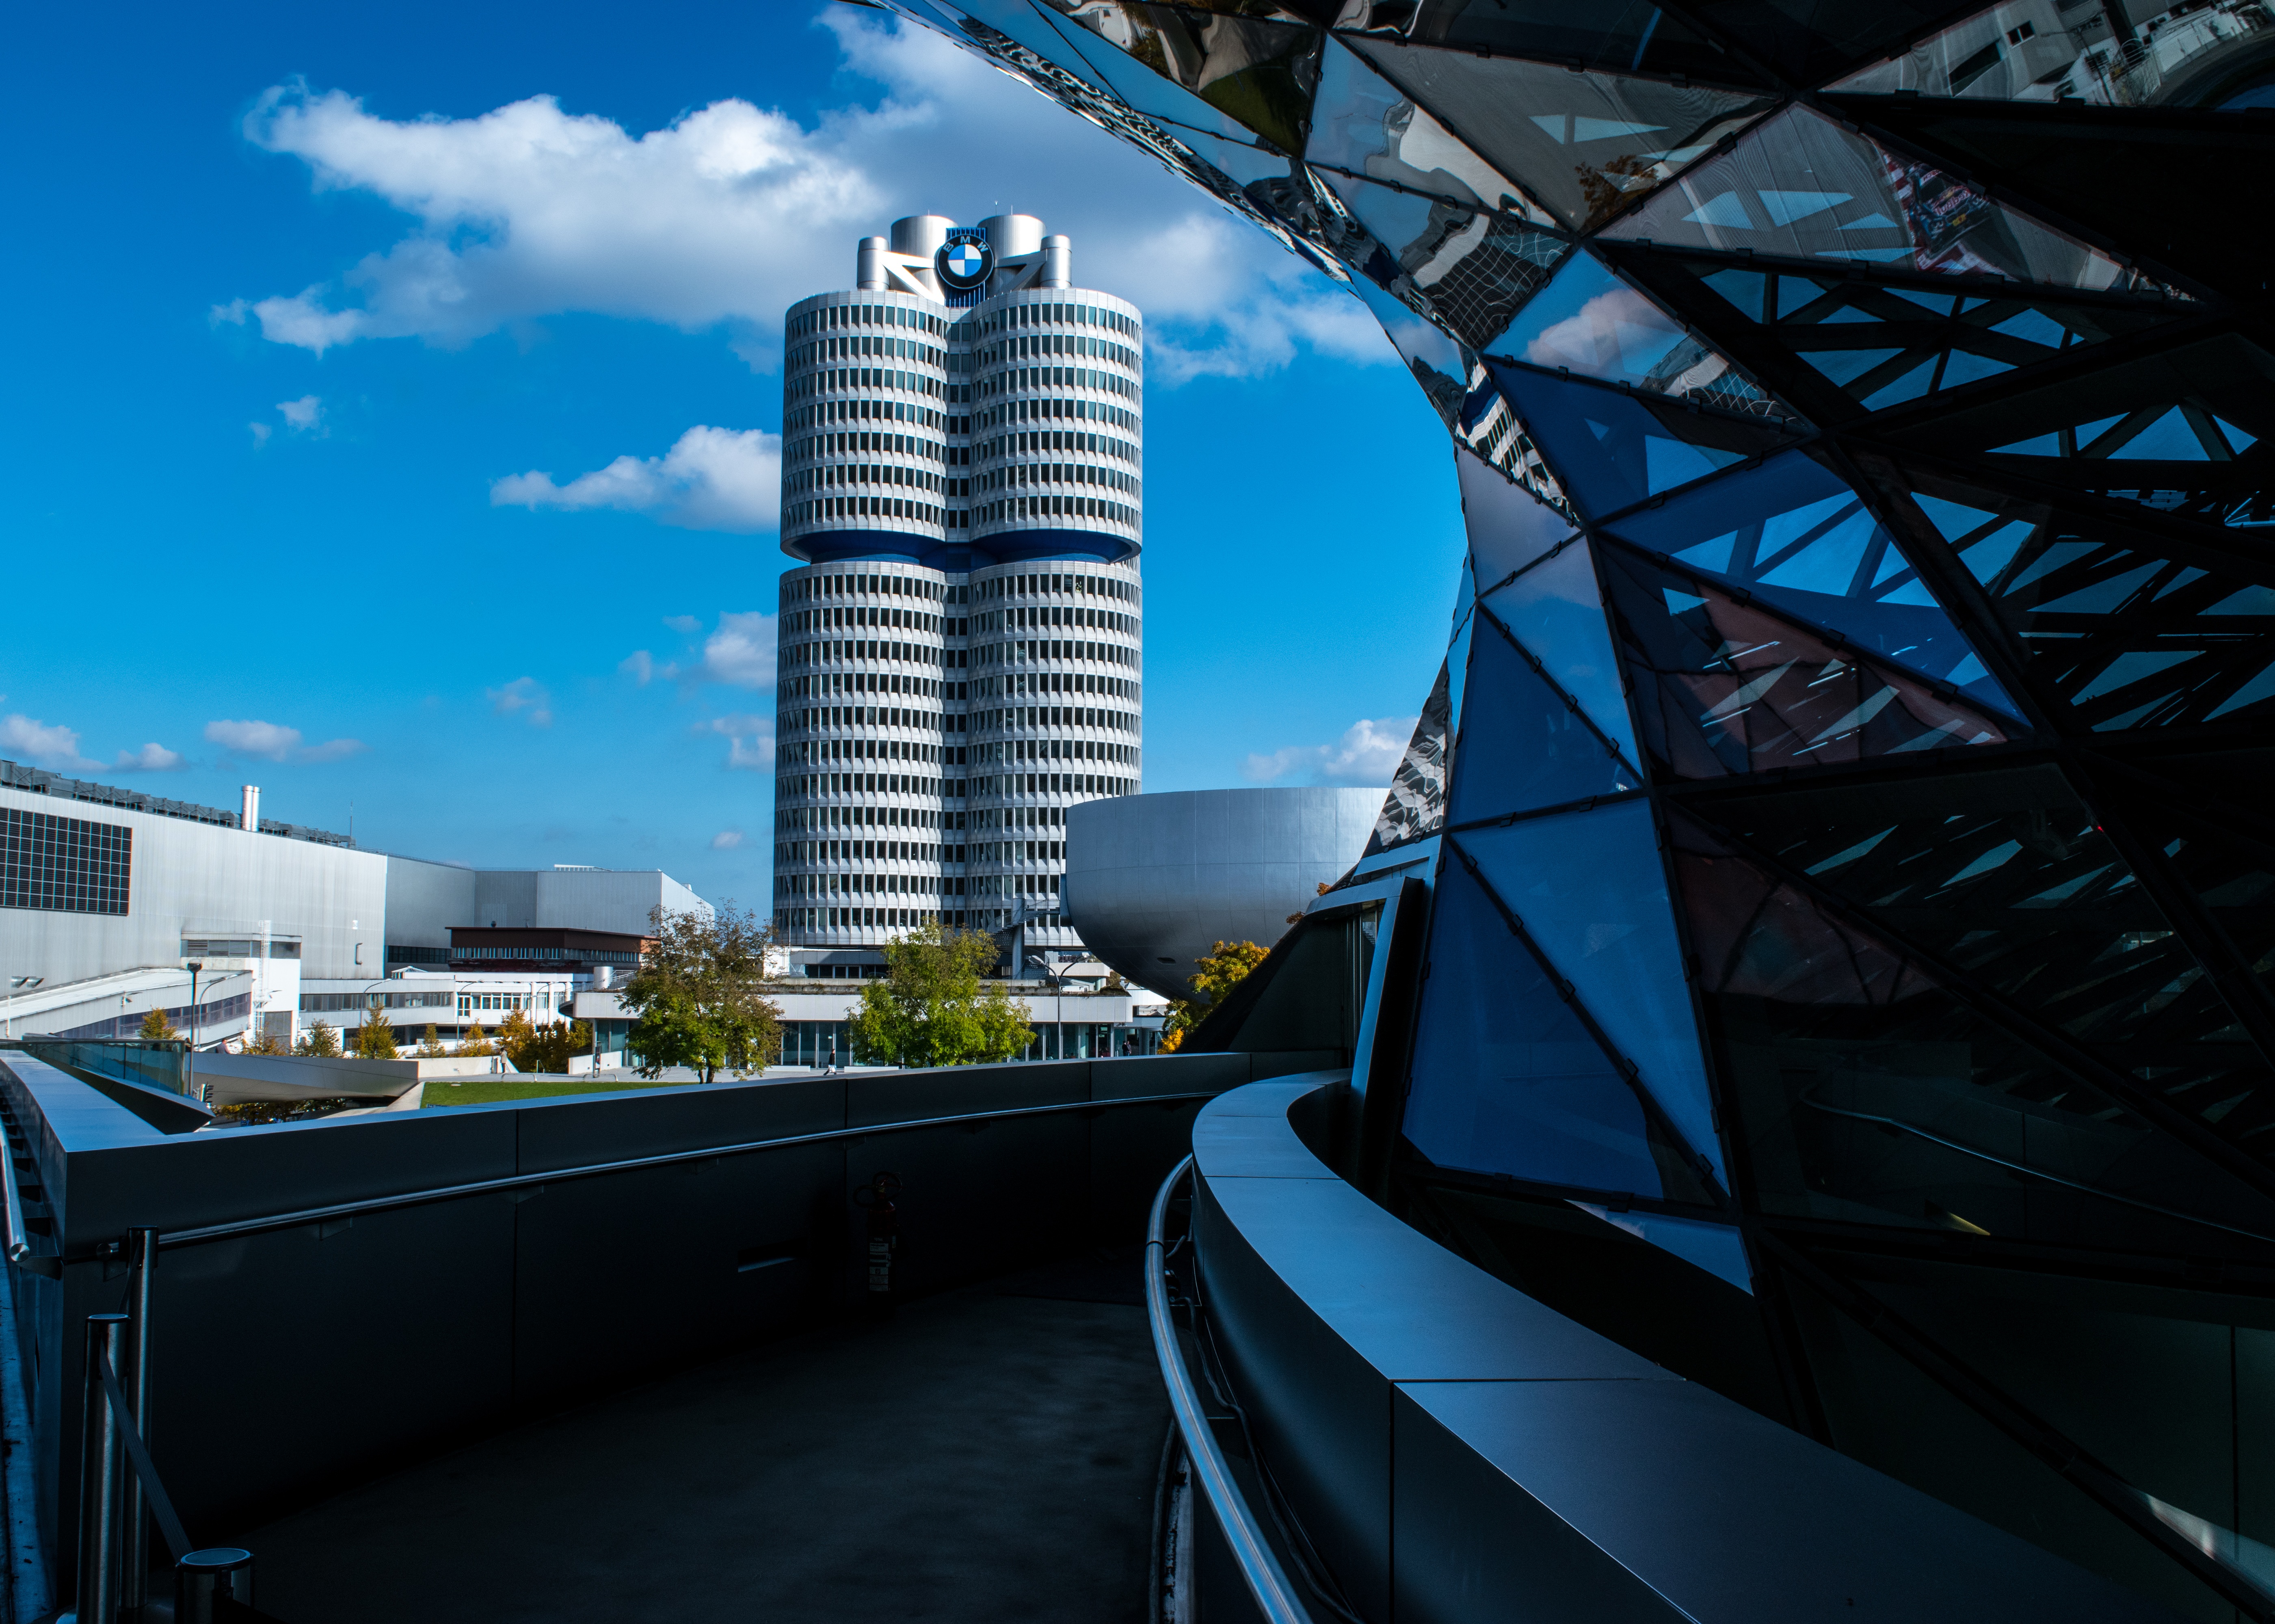 bmw, cities, architecture, building, structure, skyscrapers, modern, up to date cellphone